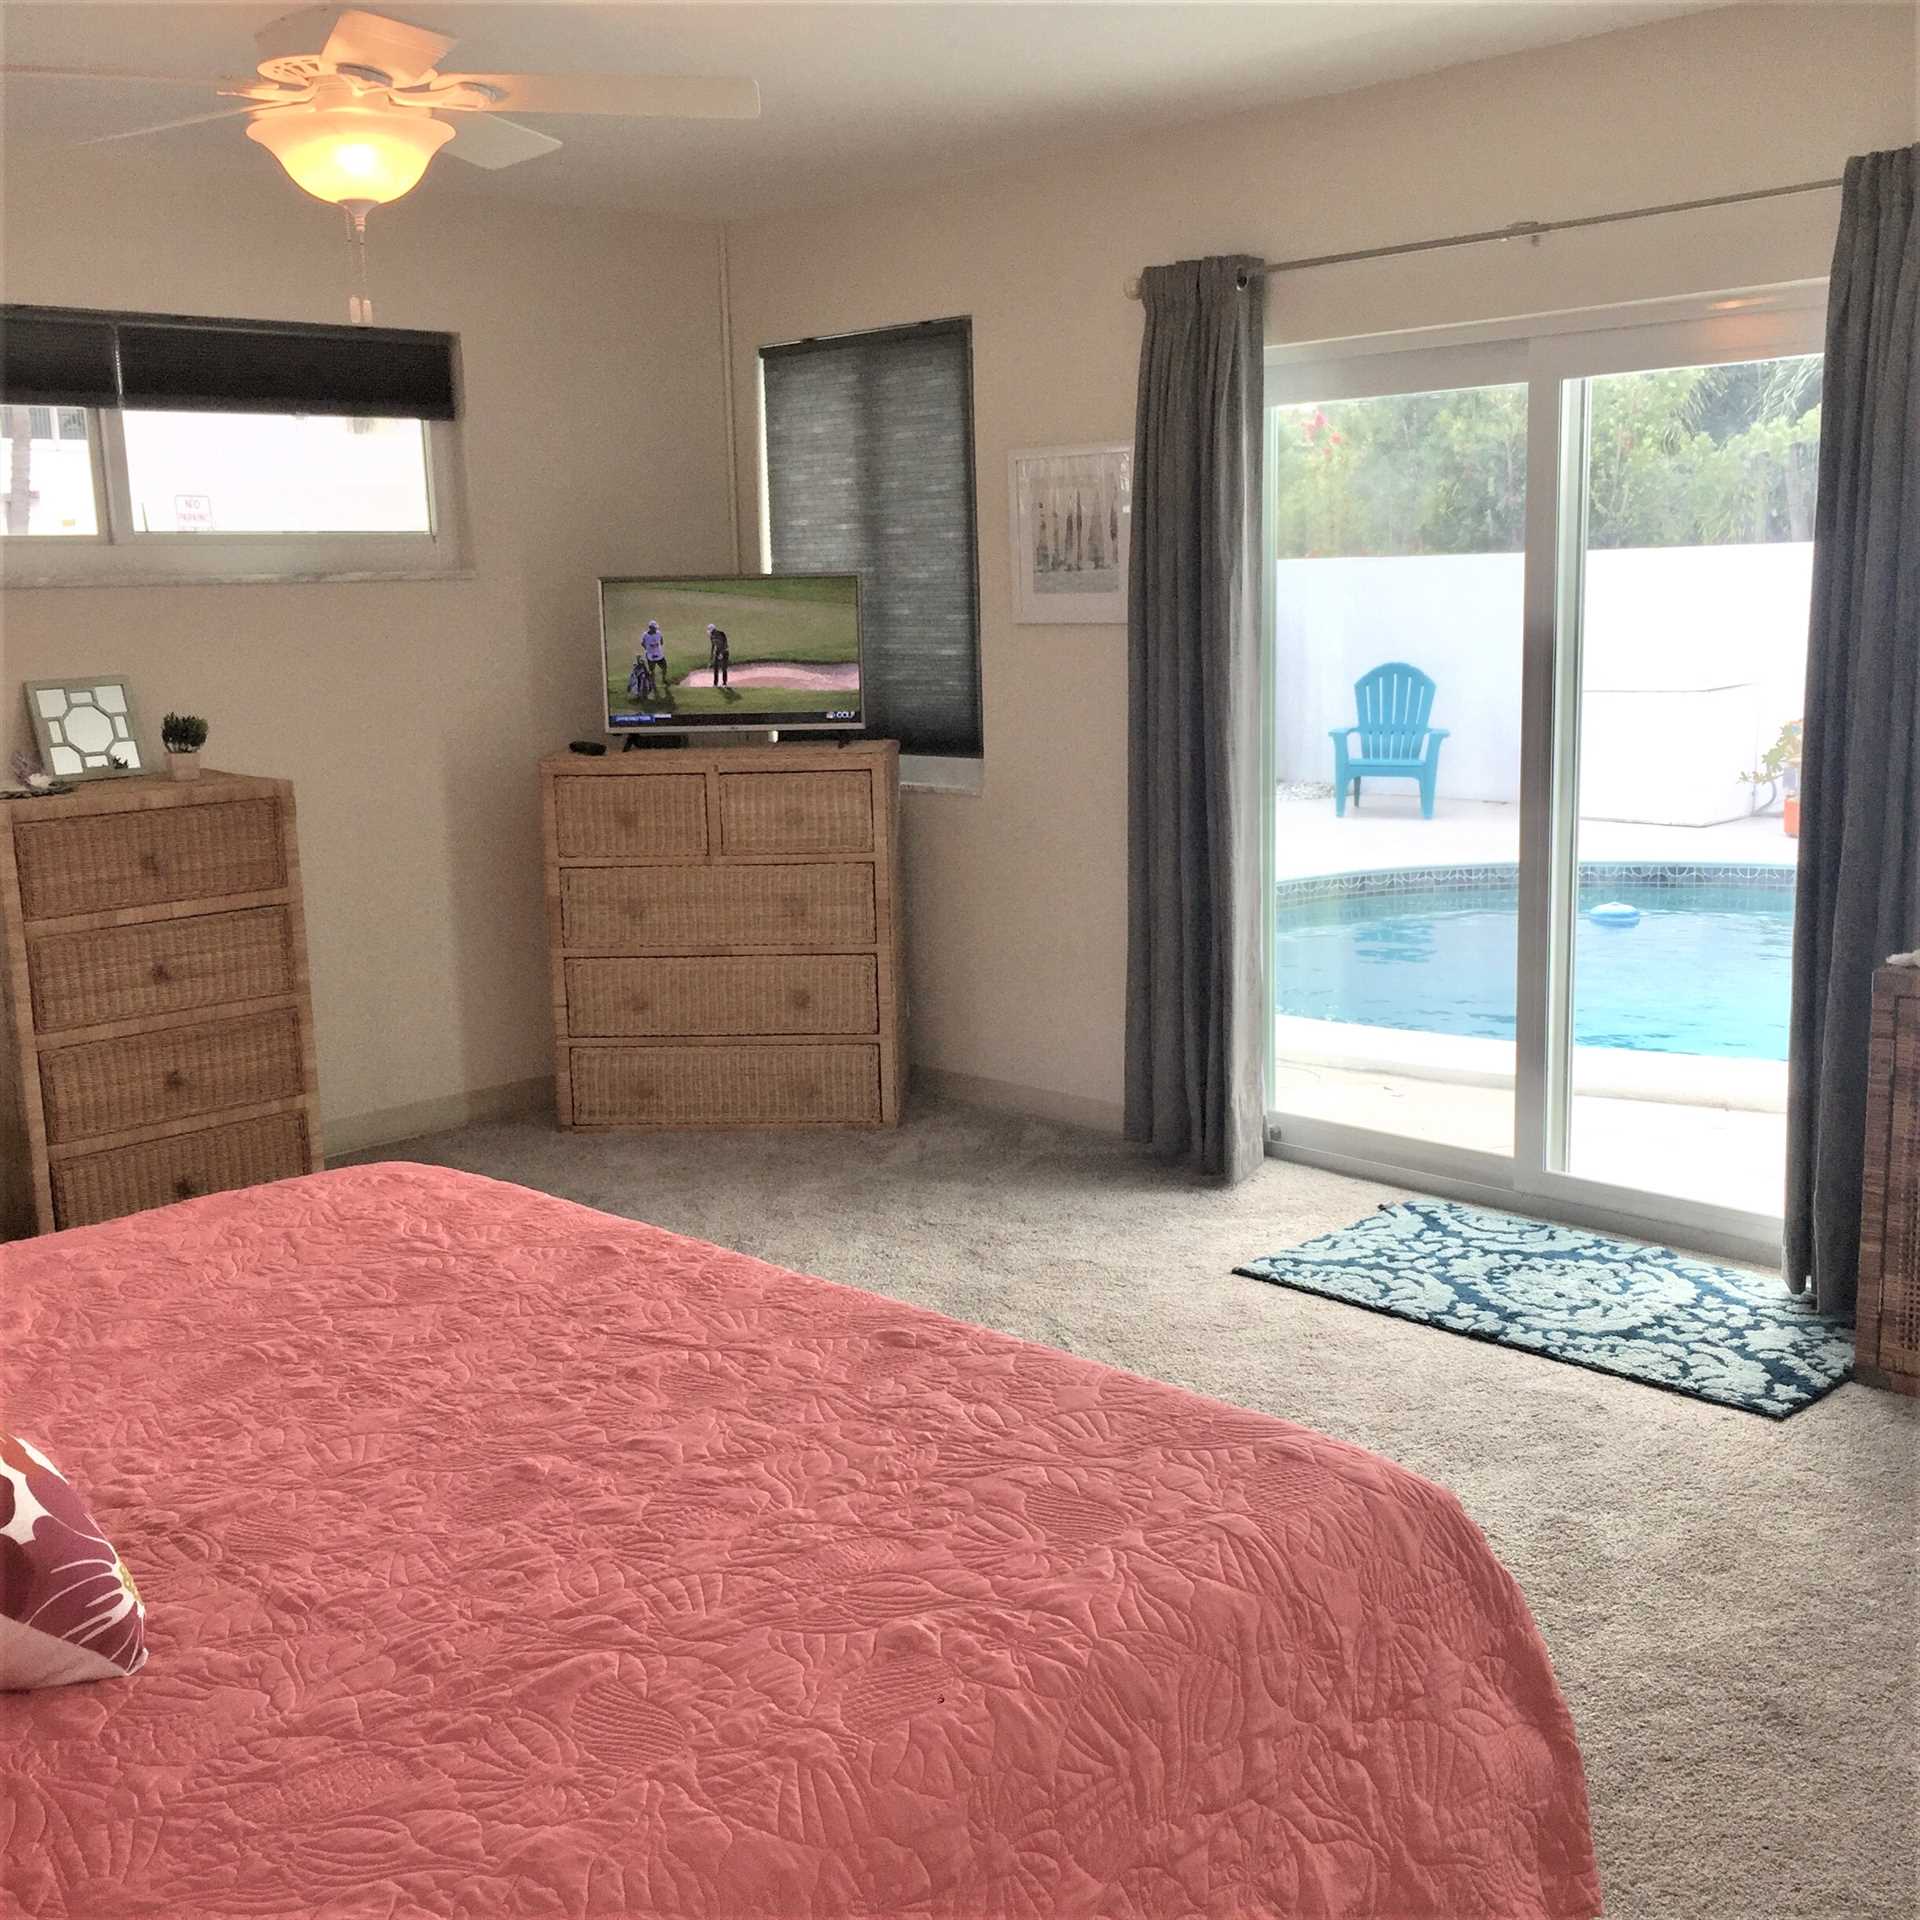 Third bedroom has HDTV and opens to the pool deck.